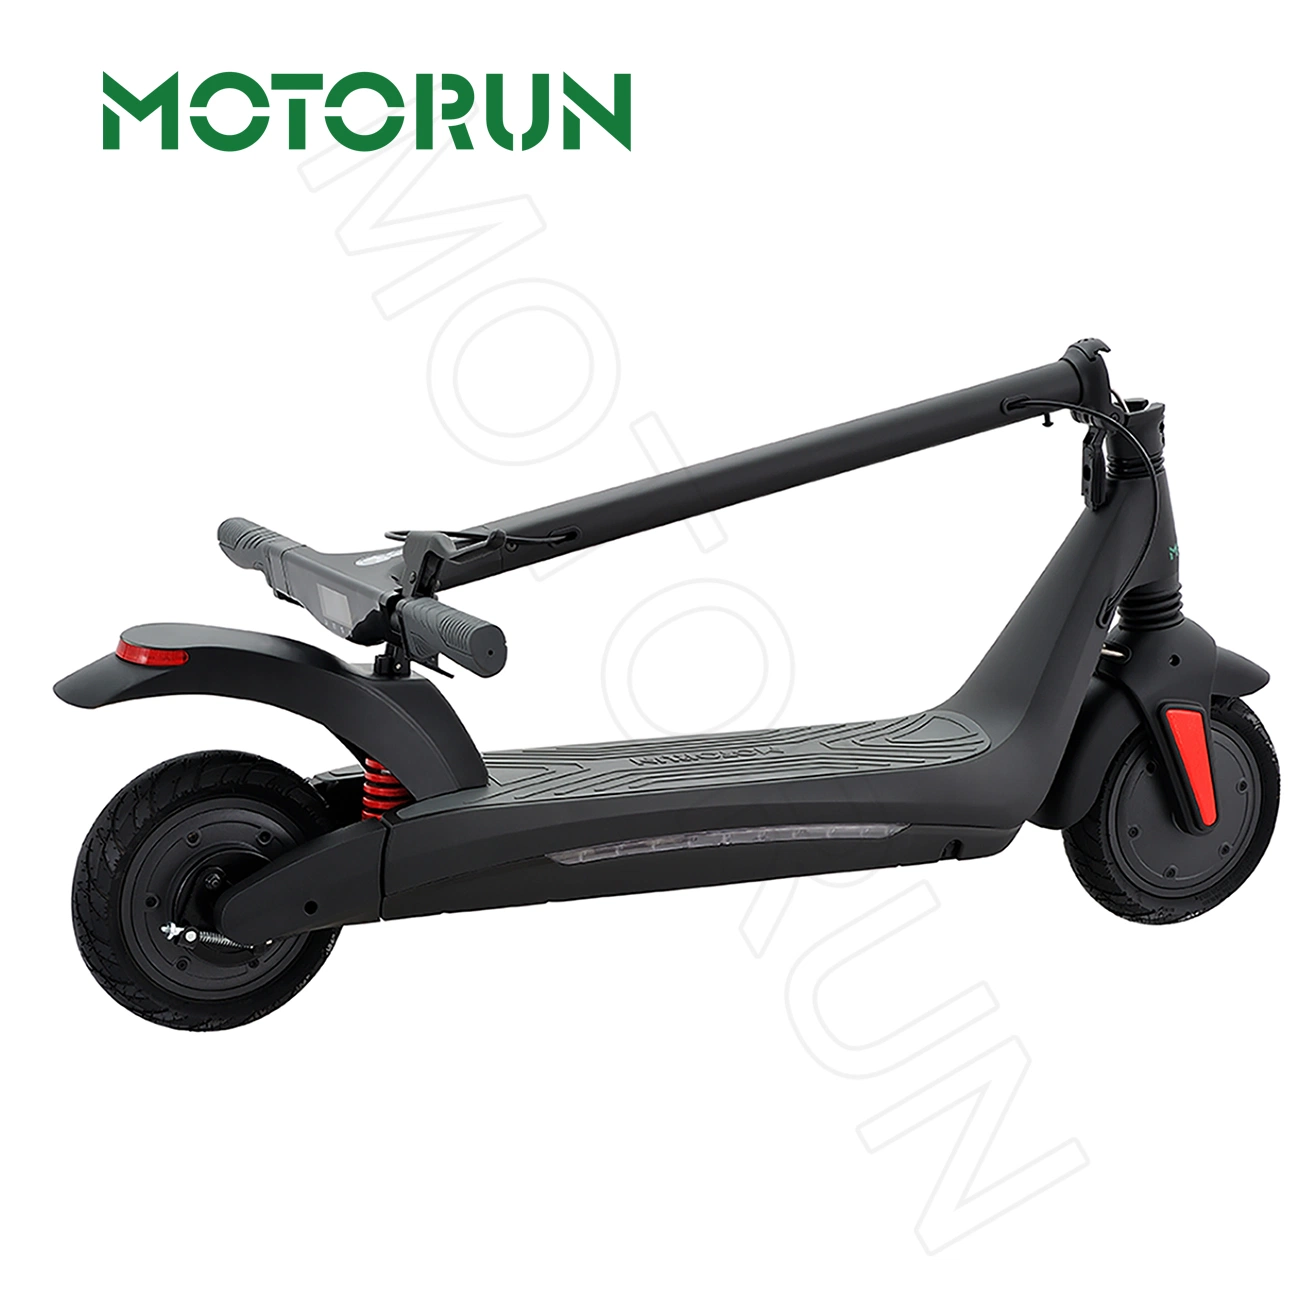 Original Factory Used Adult Handicap 5600W Seat 12 Inch Wheel 650W Extreme Performance Mobility Scooter Electric